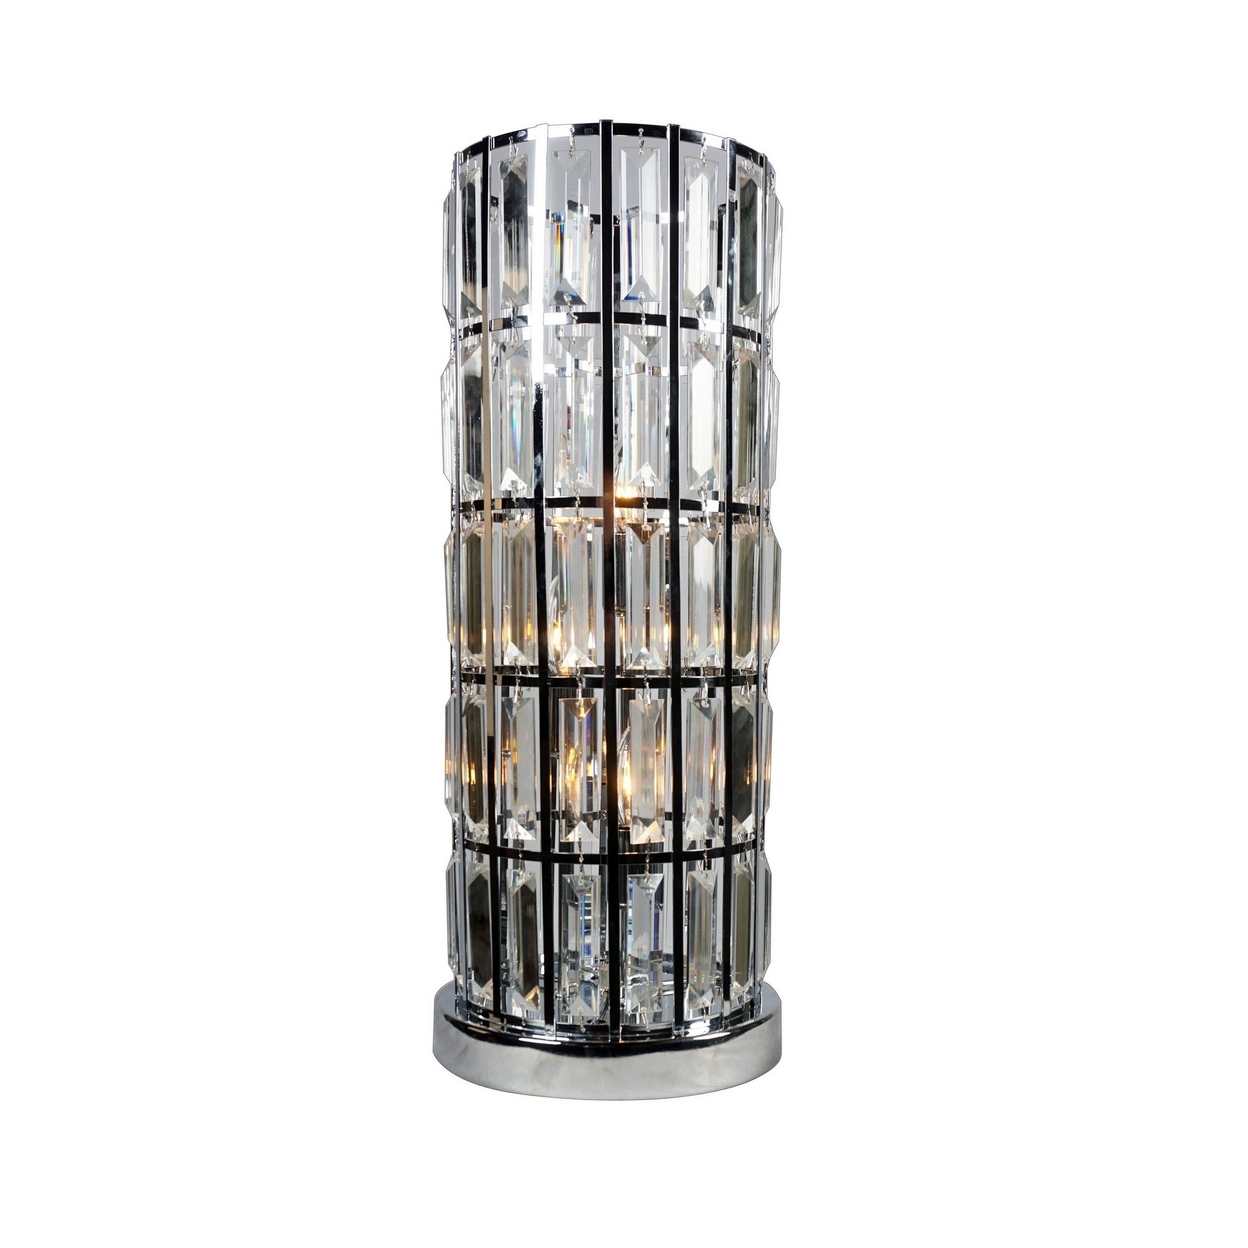 20 Inch Modern Table Lamp, Metal Cage Shade With Glass Accents, Chrome- Saltoro Sherpi